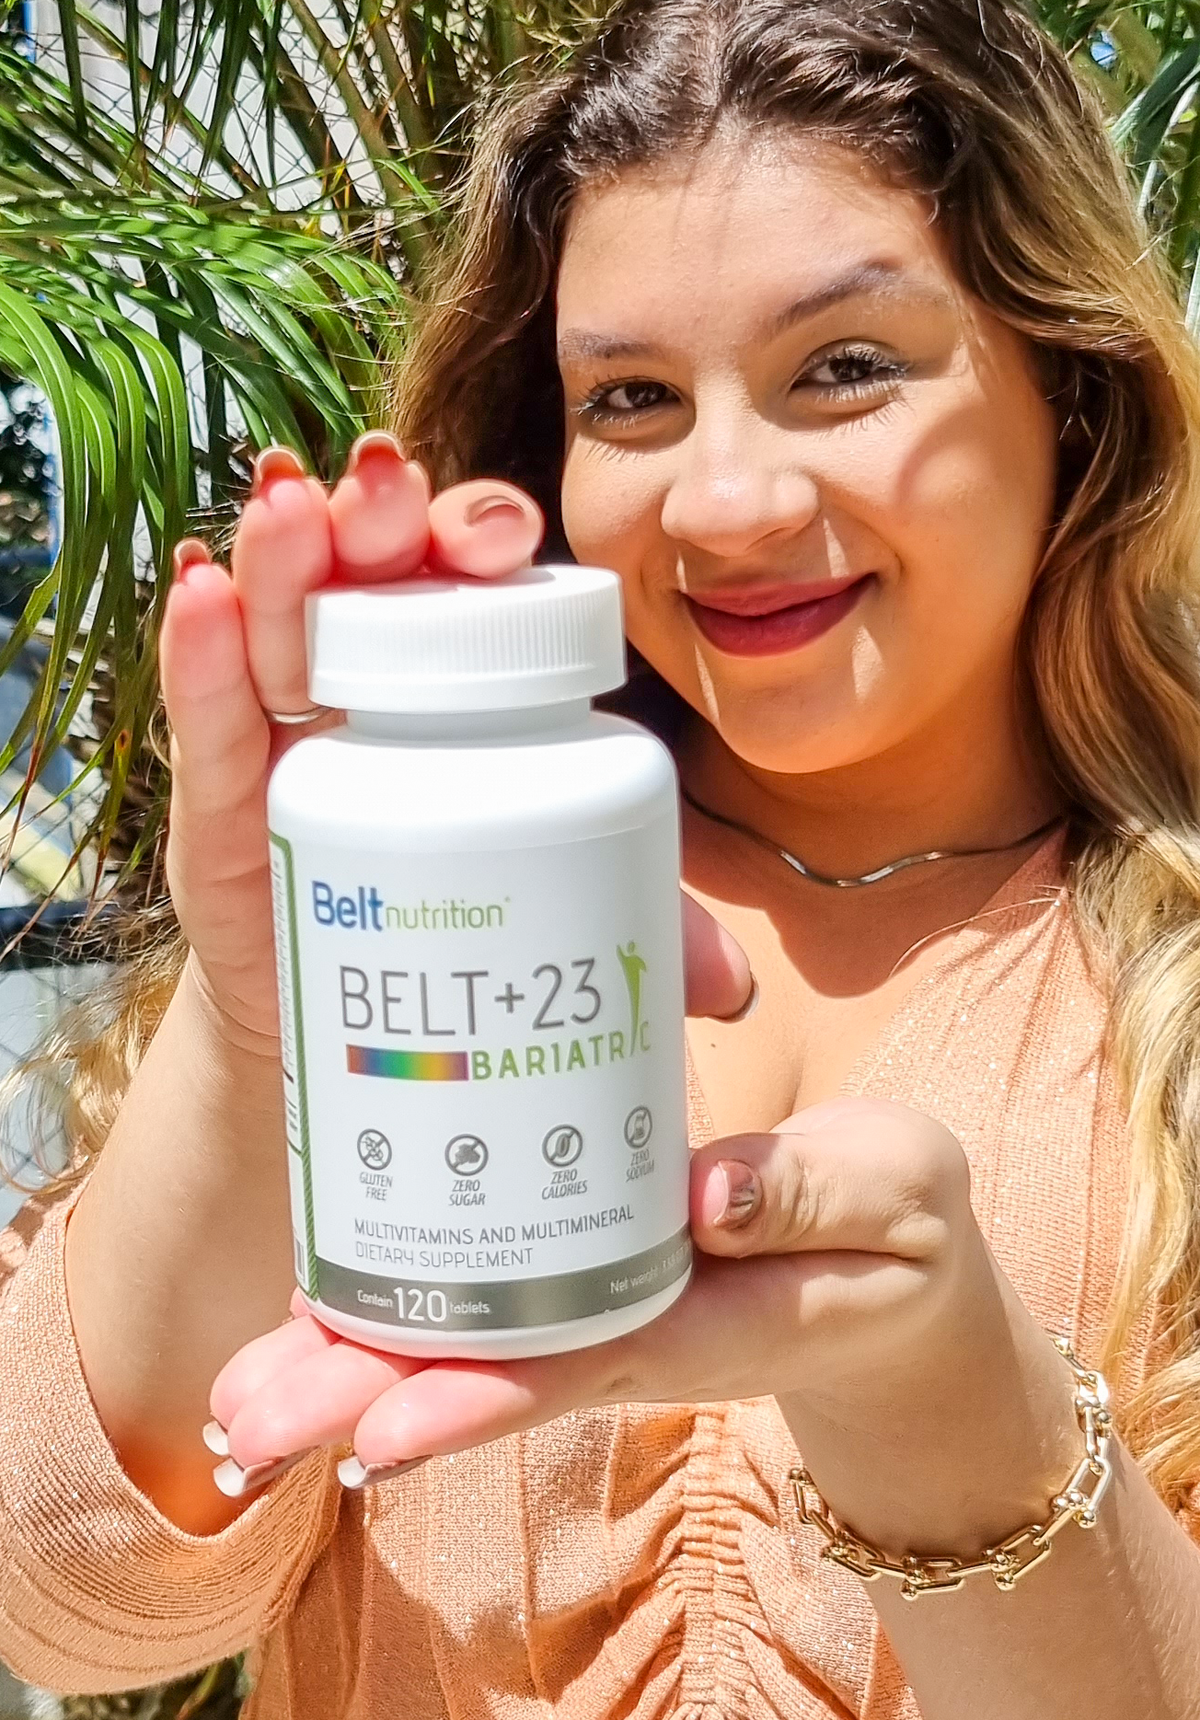 Belt +23 Bariatric Multivitamins and Multimineral Dietary Supplement